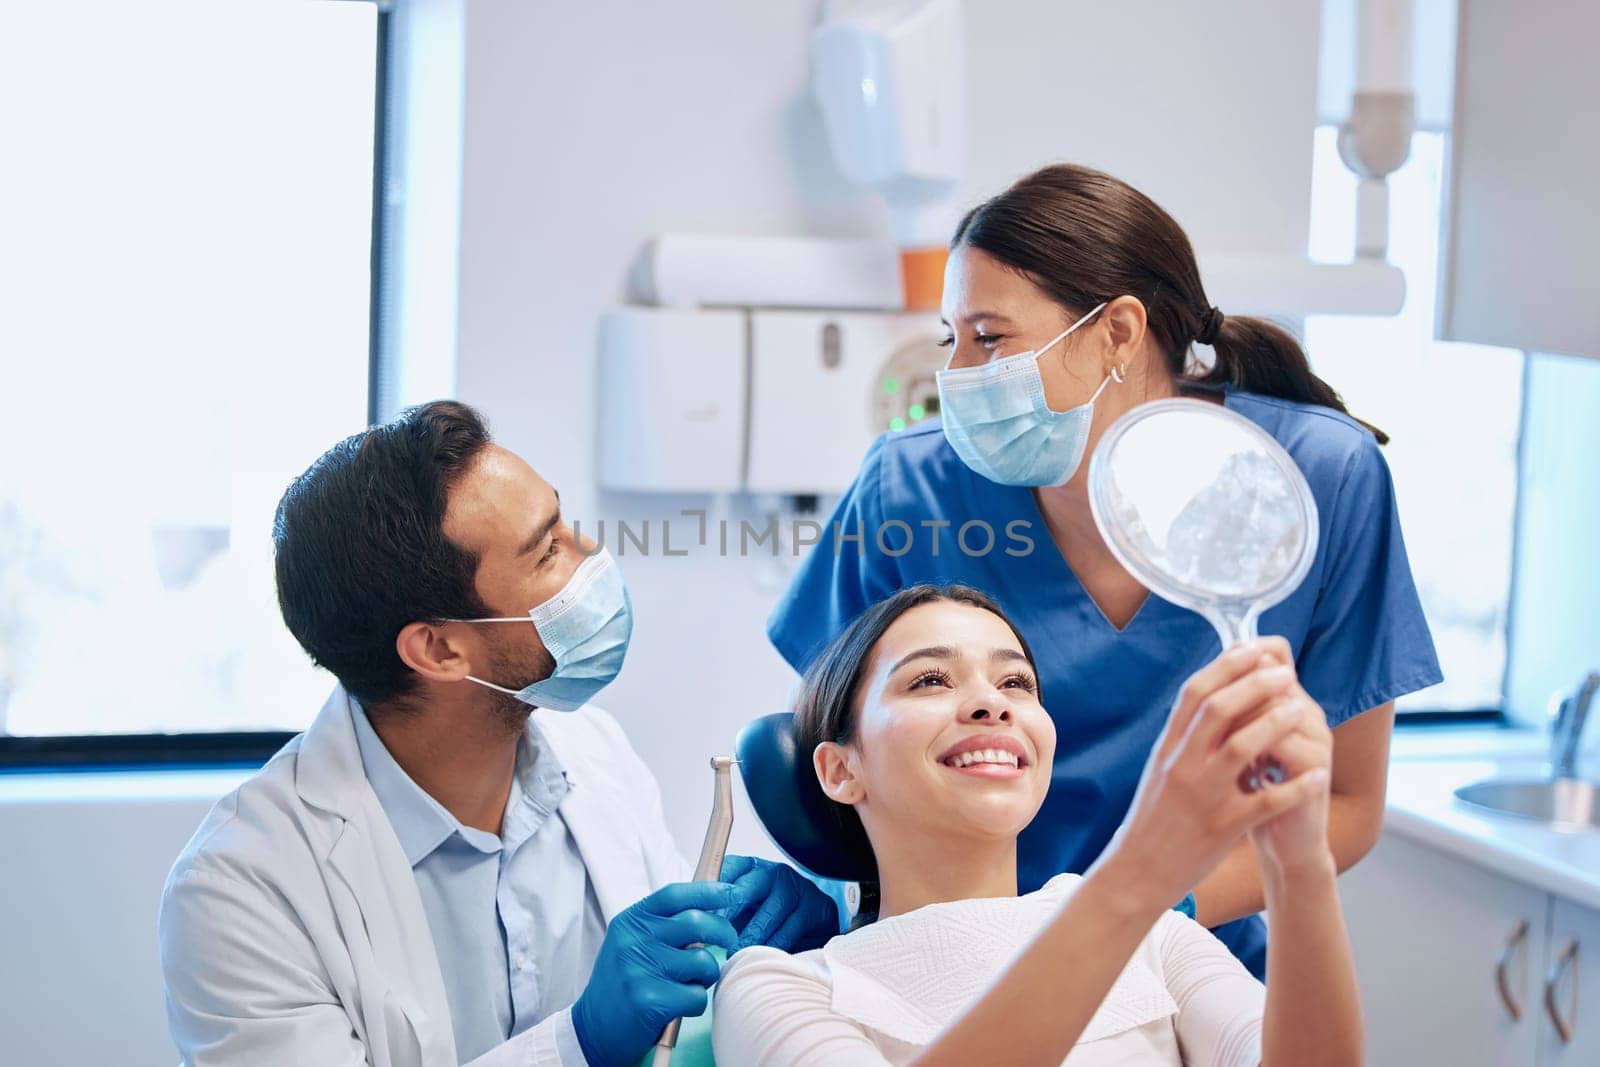 Dentist, mirror and woman with smile for teeth whitening, braces and dental consultation. Healthcare, dentistry and happy female patient with orthodontist for oral hygiene, wellness and cleaning.